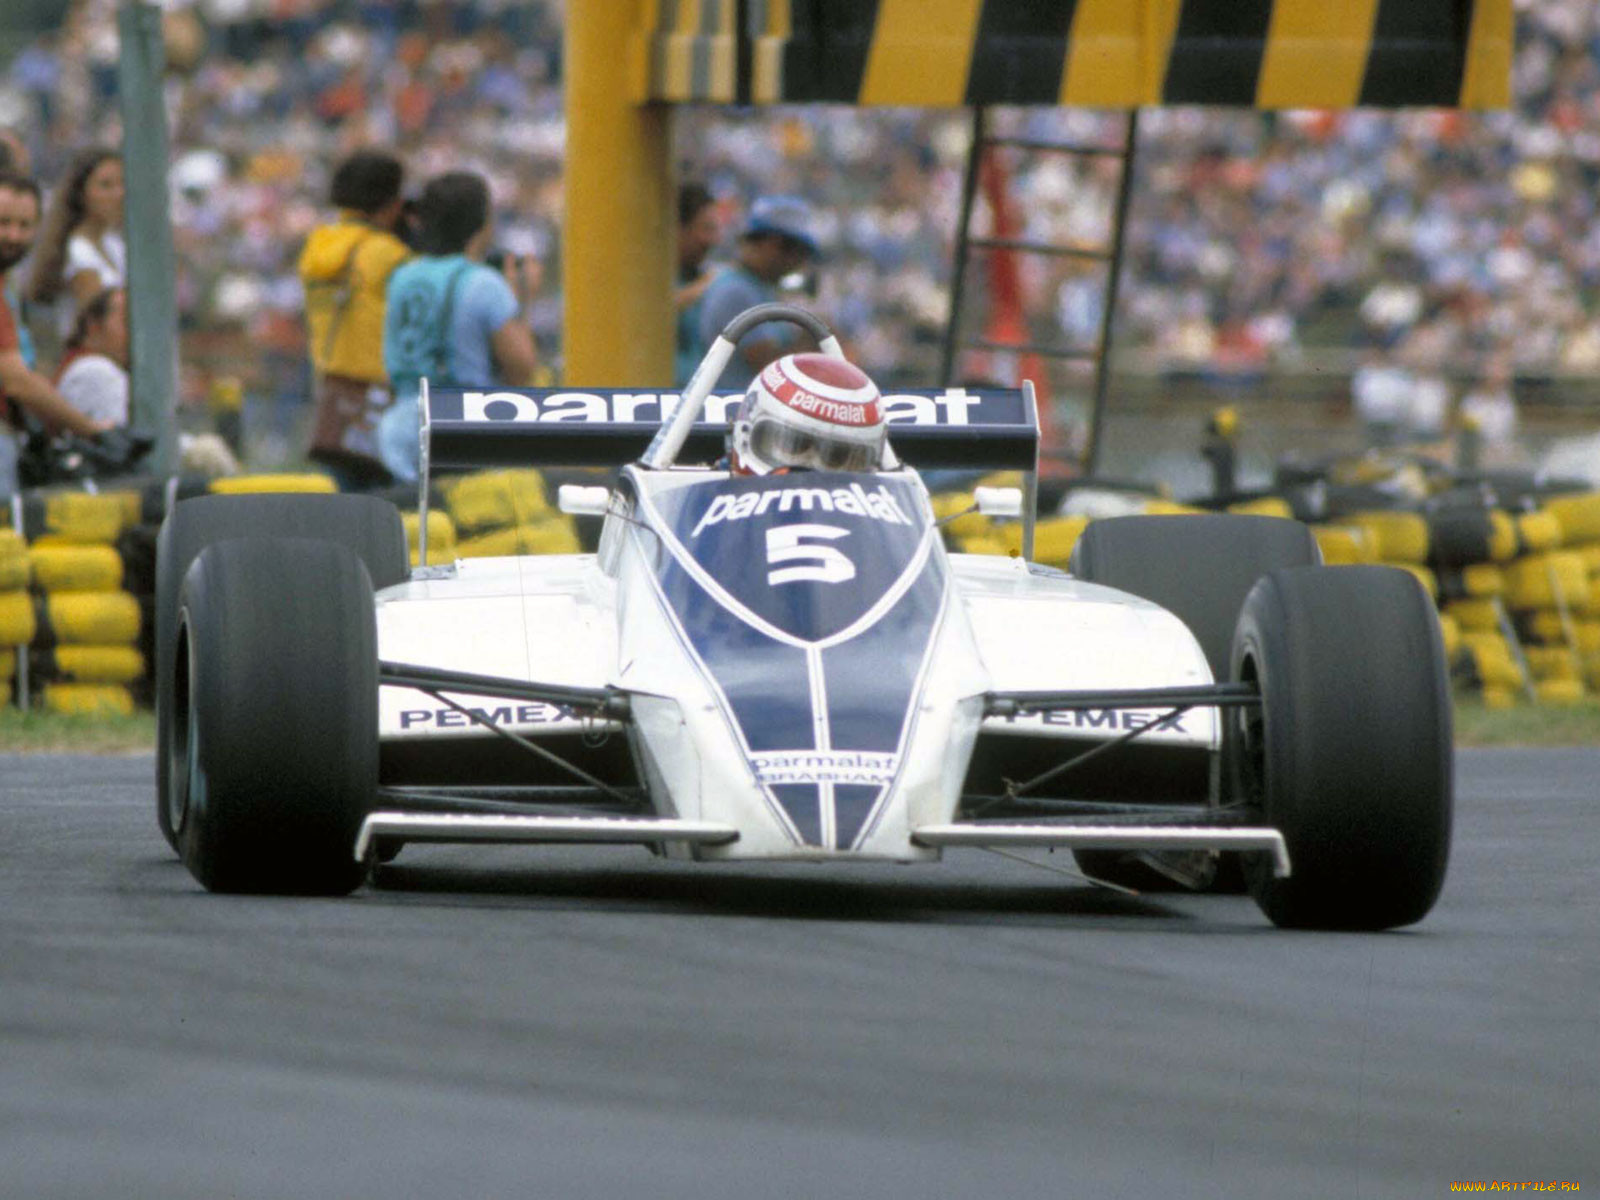 nelson, piquet, 4th, win, of, gp, brabham, bt49c, argentina, buenos, aires, circuit, april, 12th, 1981, , 